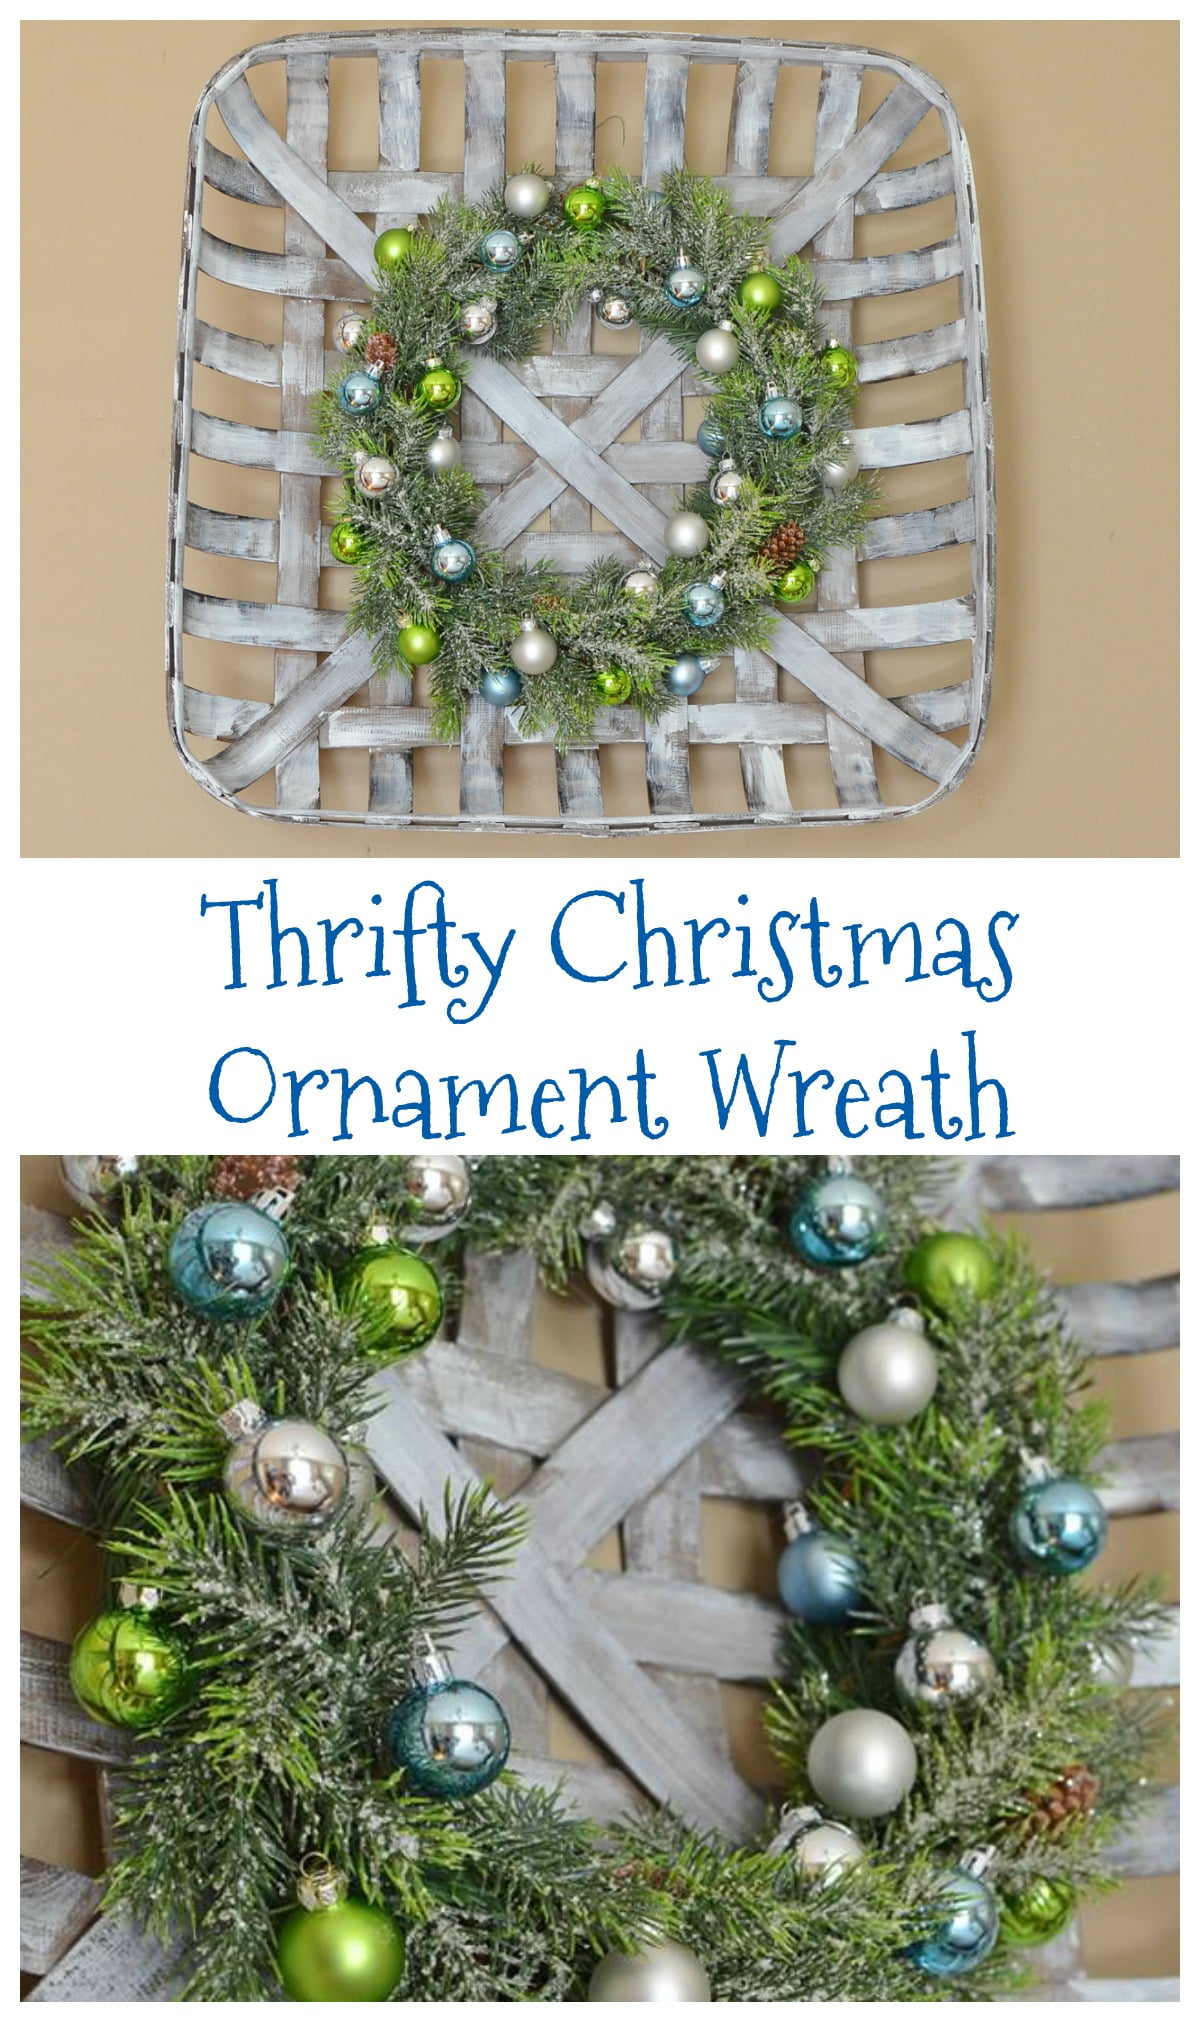 Thrifty christmas ornament wreath graphic